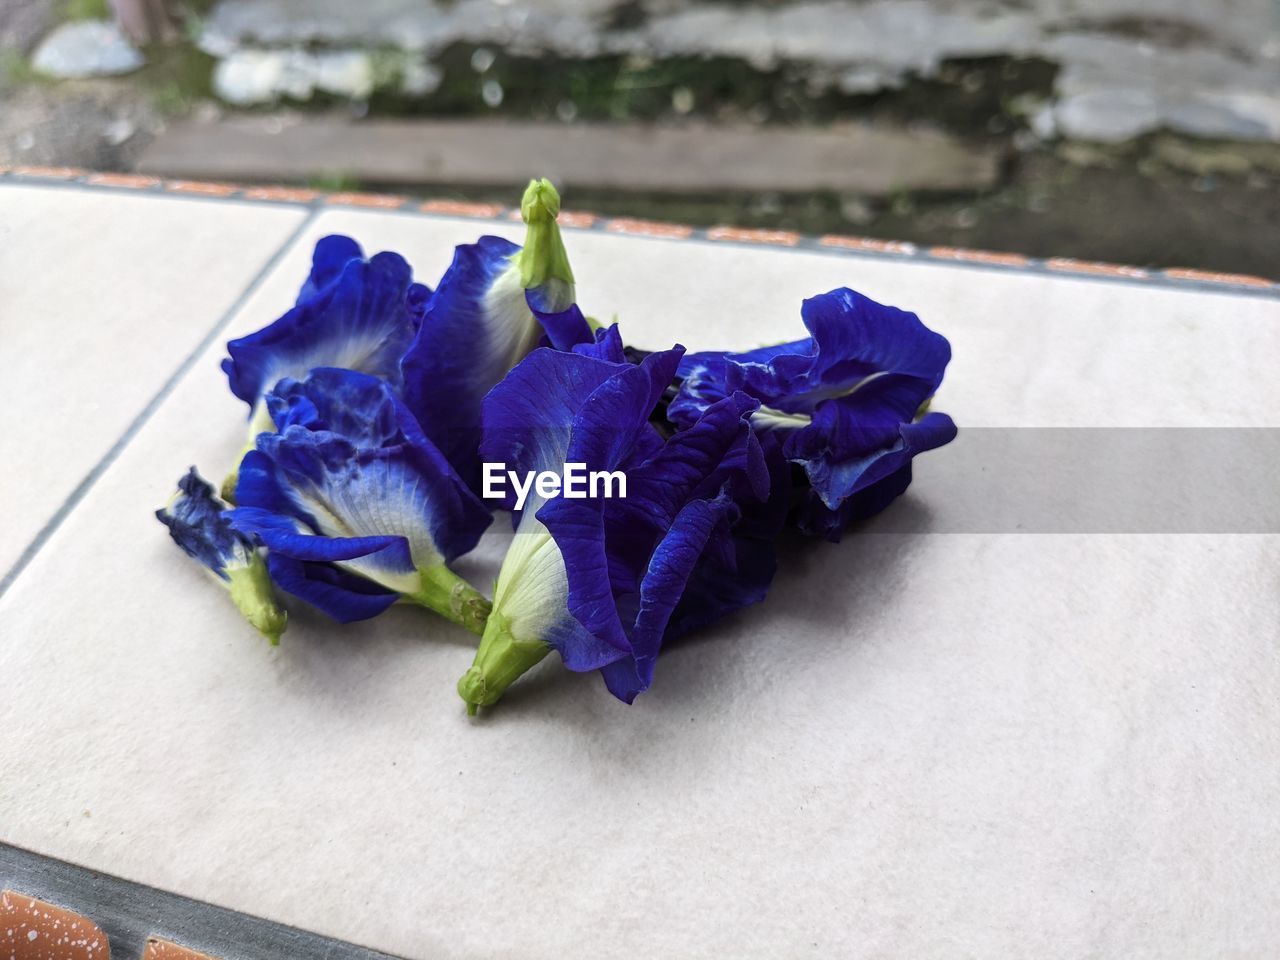 CLOSE-UP OF PURPLE ROSES ON BLUE TABLE